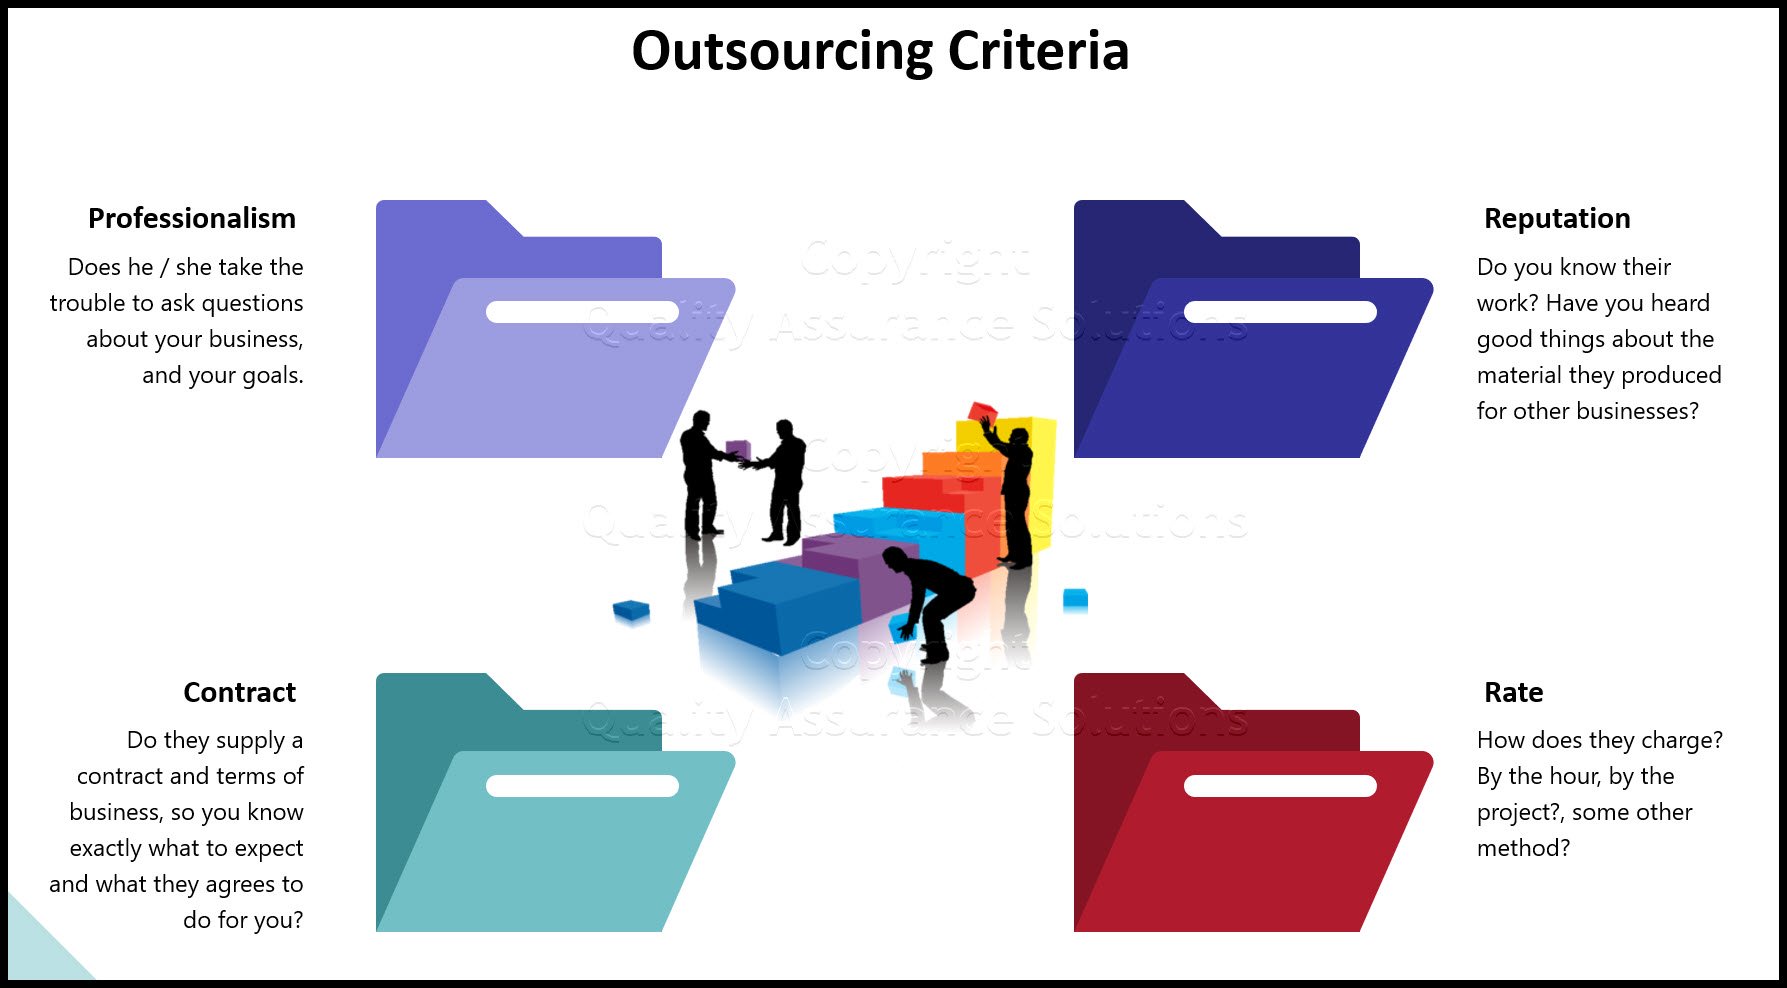 Is outsourcing good or bad? That depends on your approach and the project. To help, we also compare DIY vs Outsourcing.